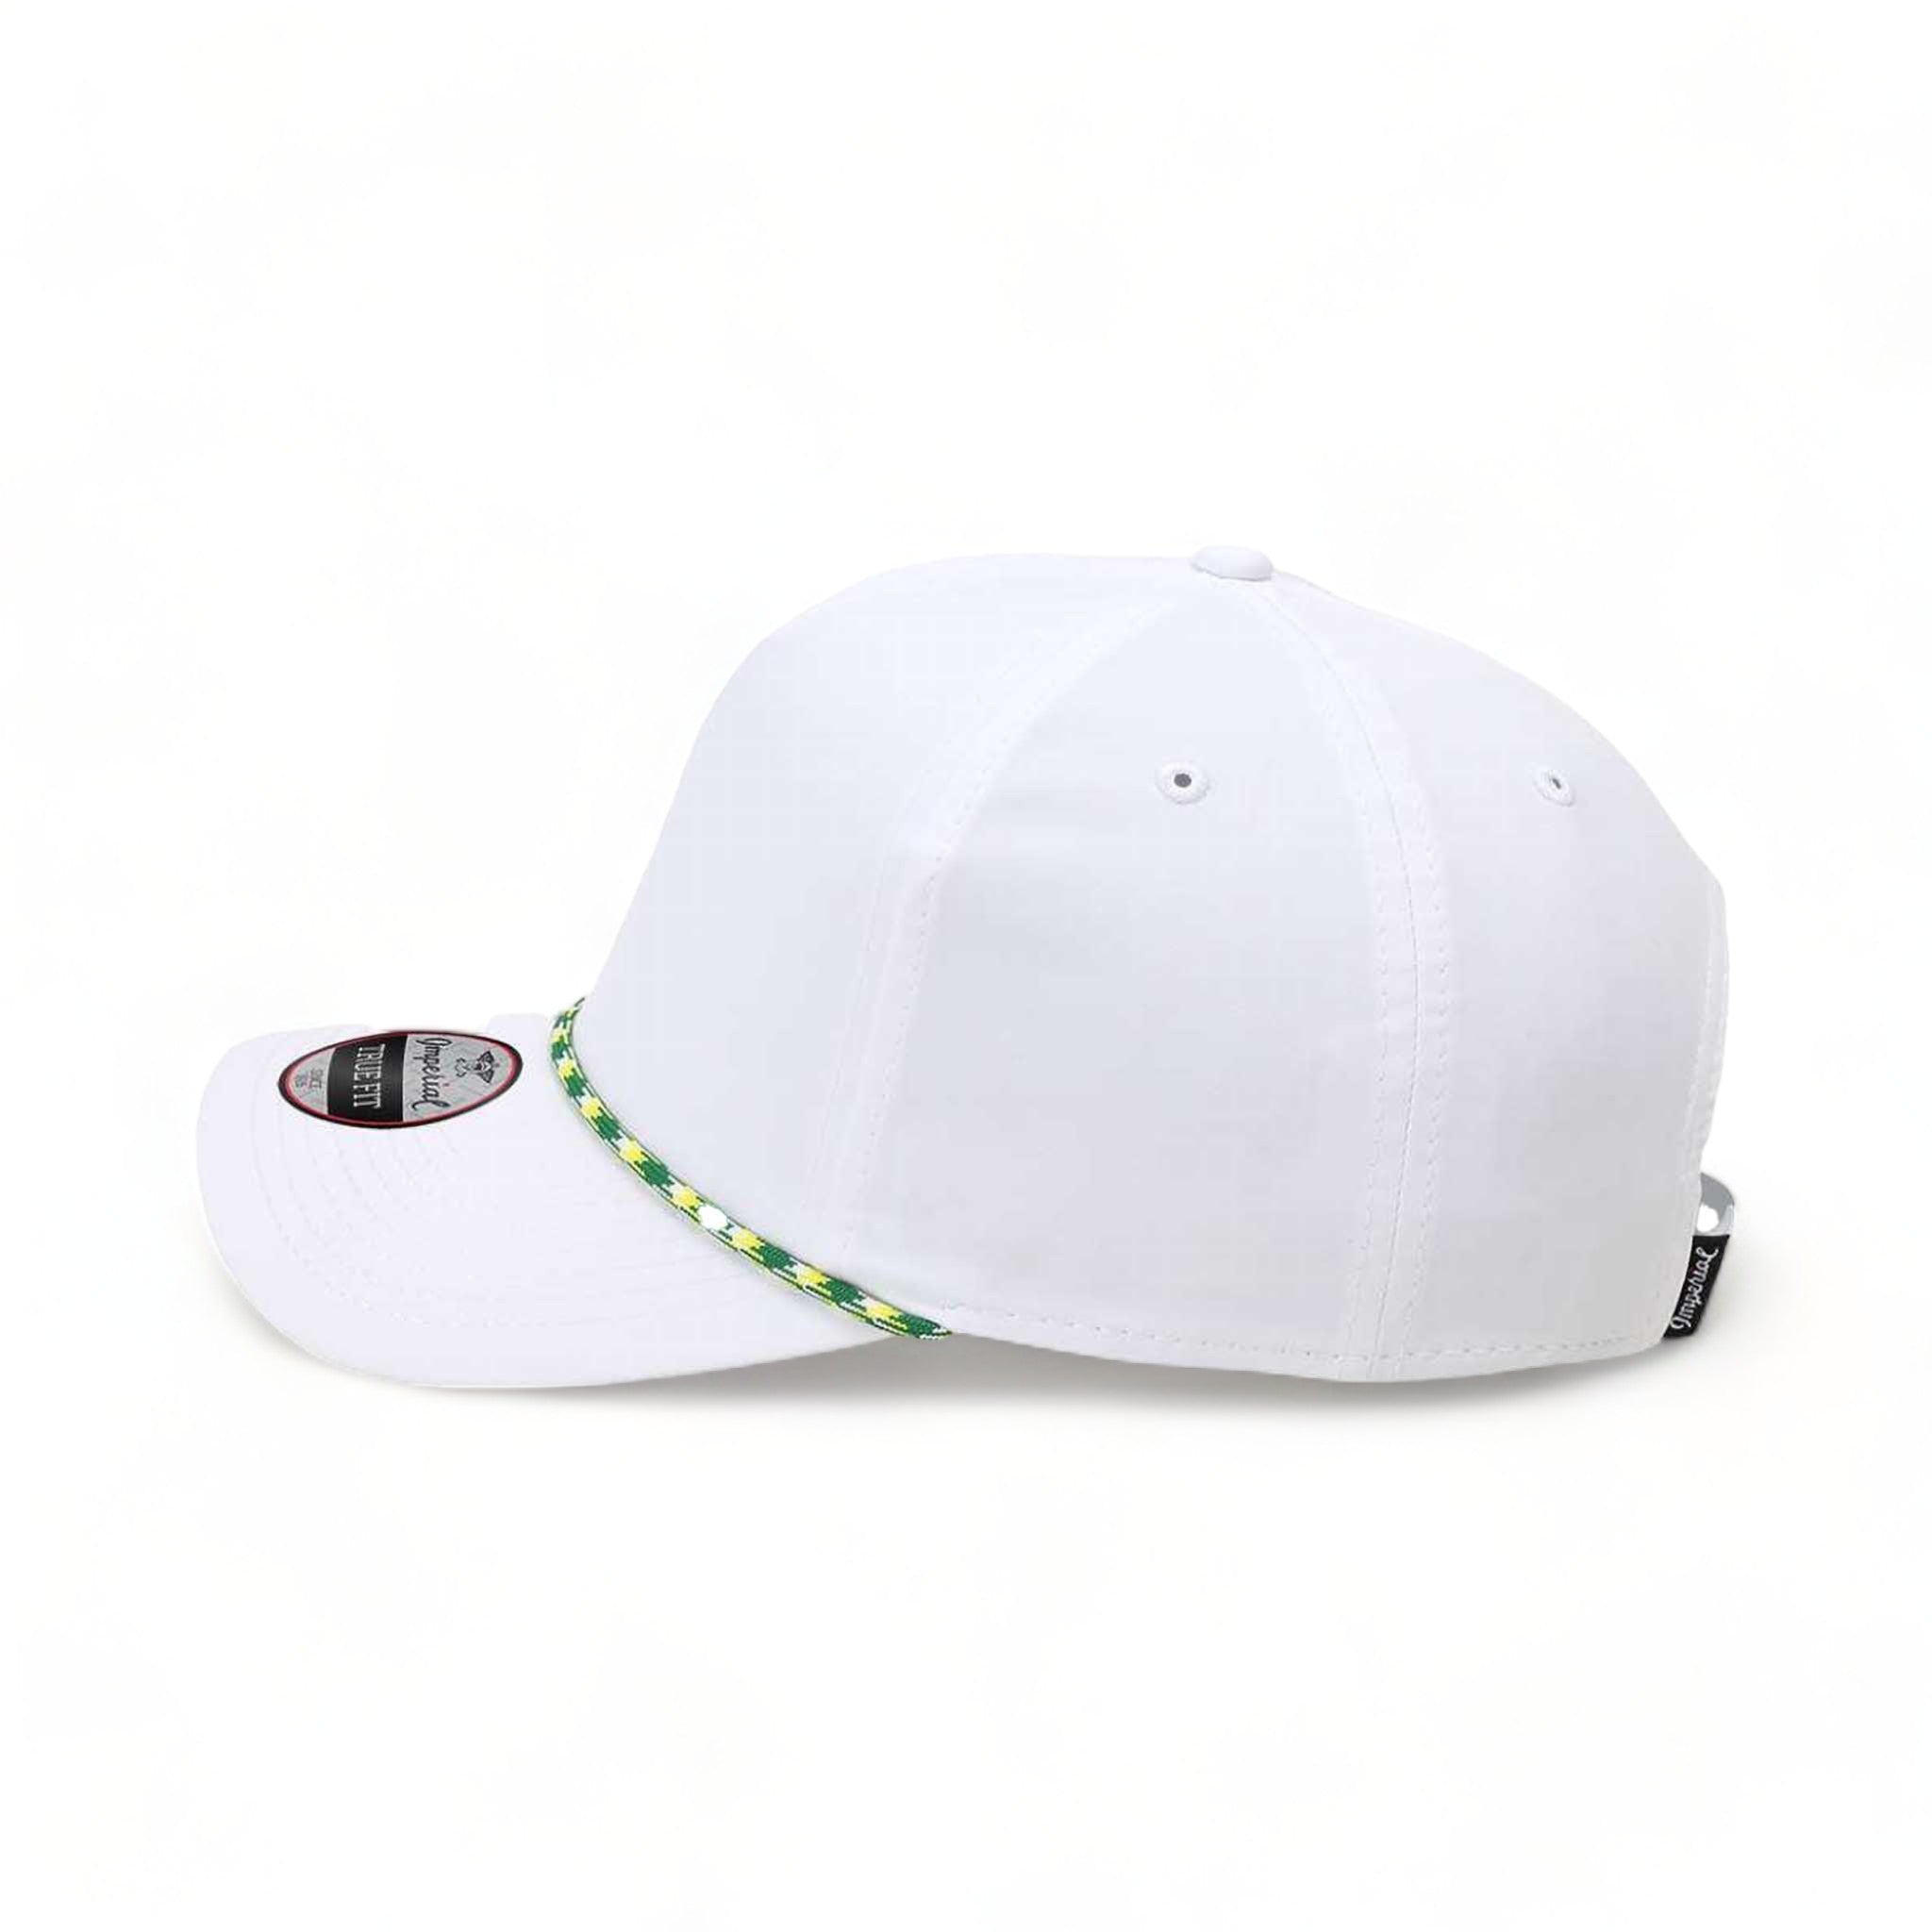 Side view of Imperial 5054 custom hat in white and green-yellow